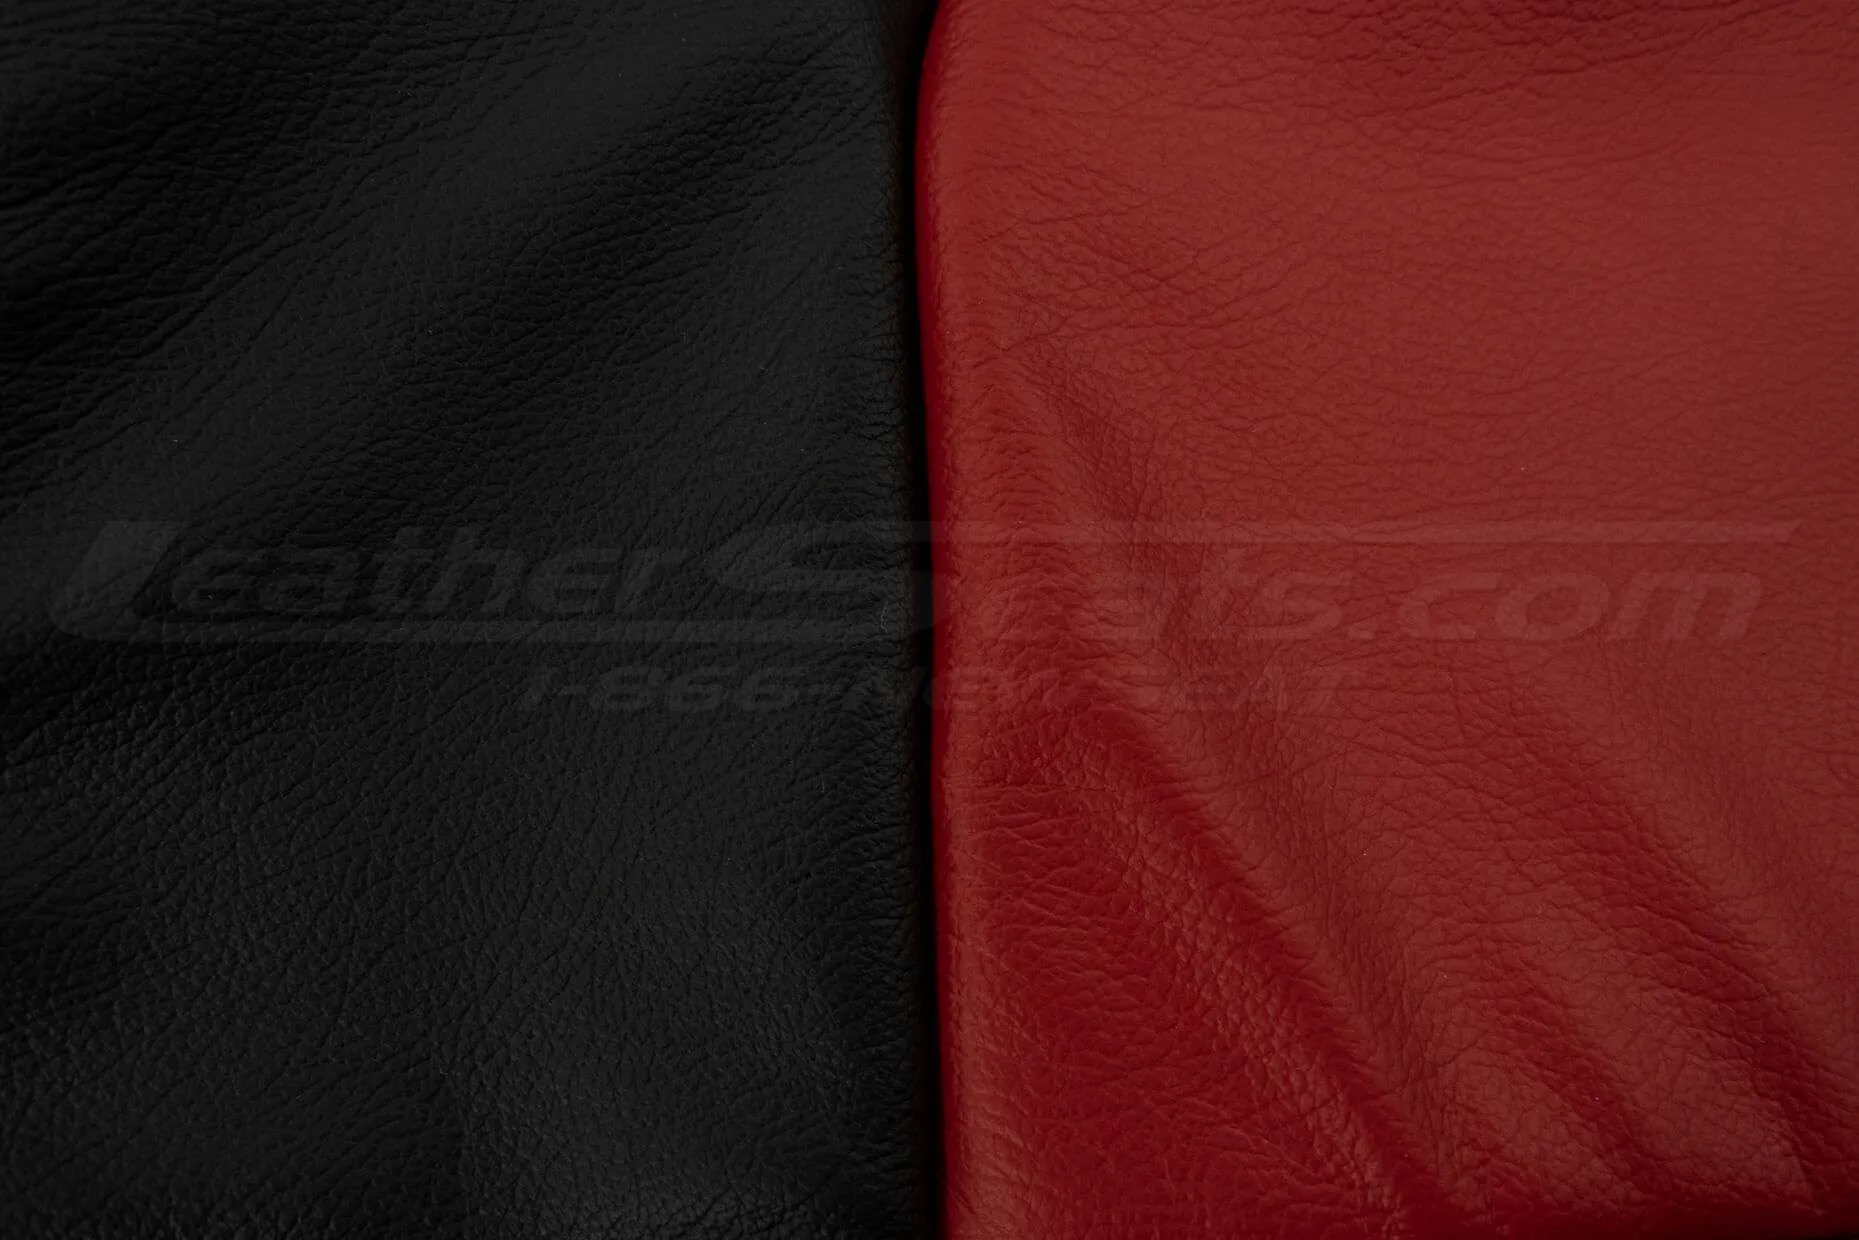 Pontiac G8 Leather Kit - Black & Red - Black and red leather texture and color comparison